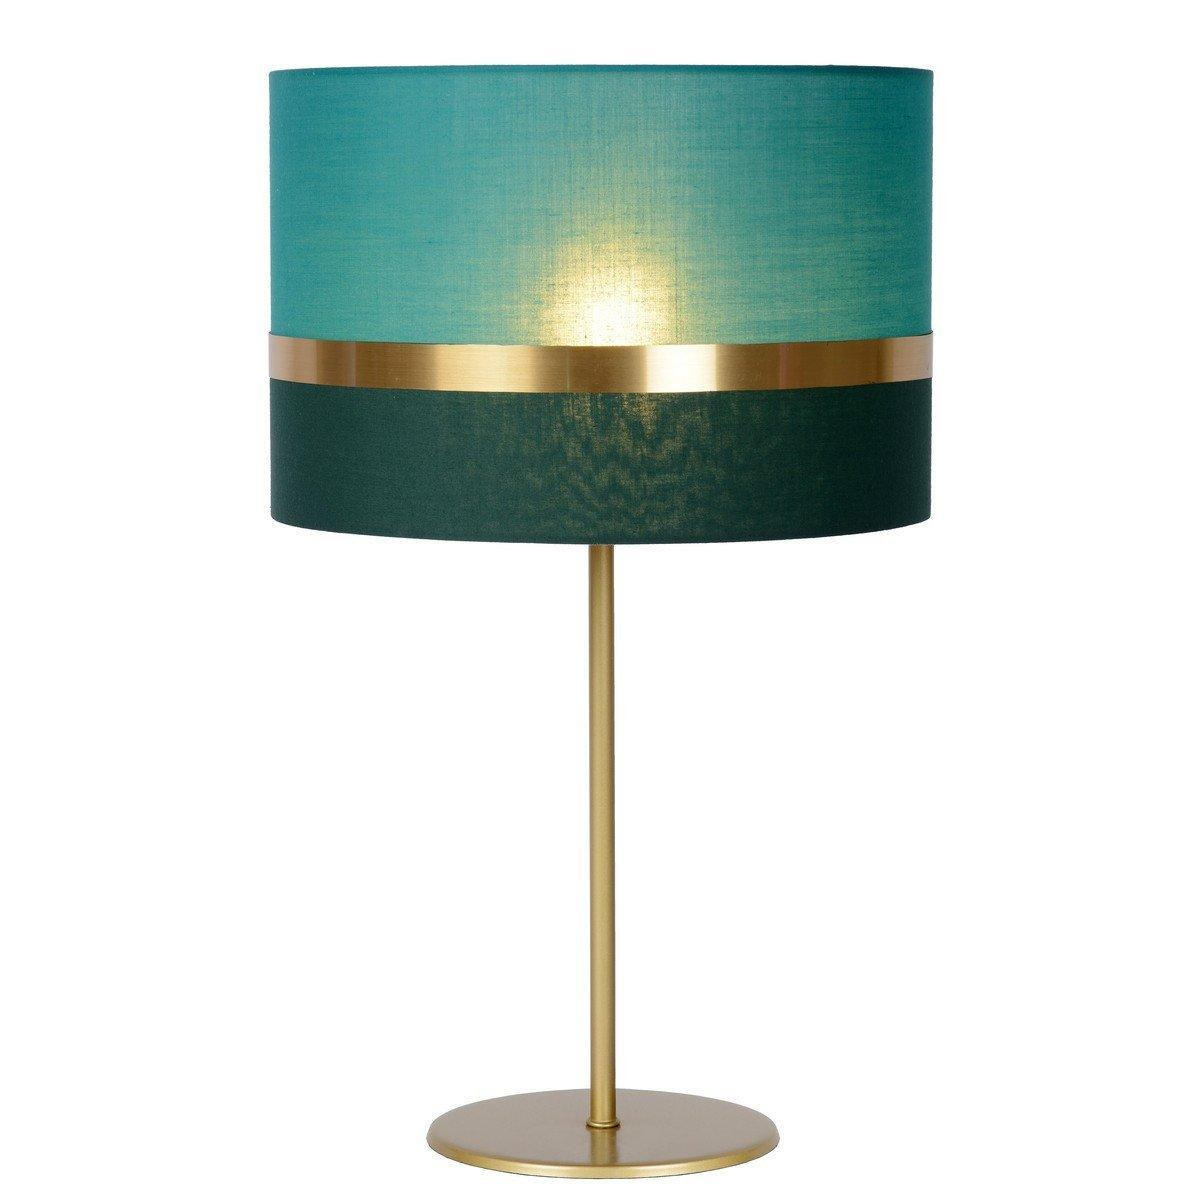 'EXTRAVAGANZA TUSSE' Non Dimmable Stylish Indoor Desk Table Lamp 1xE14 - image 1